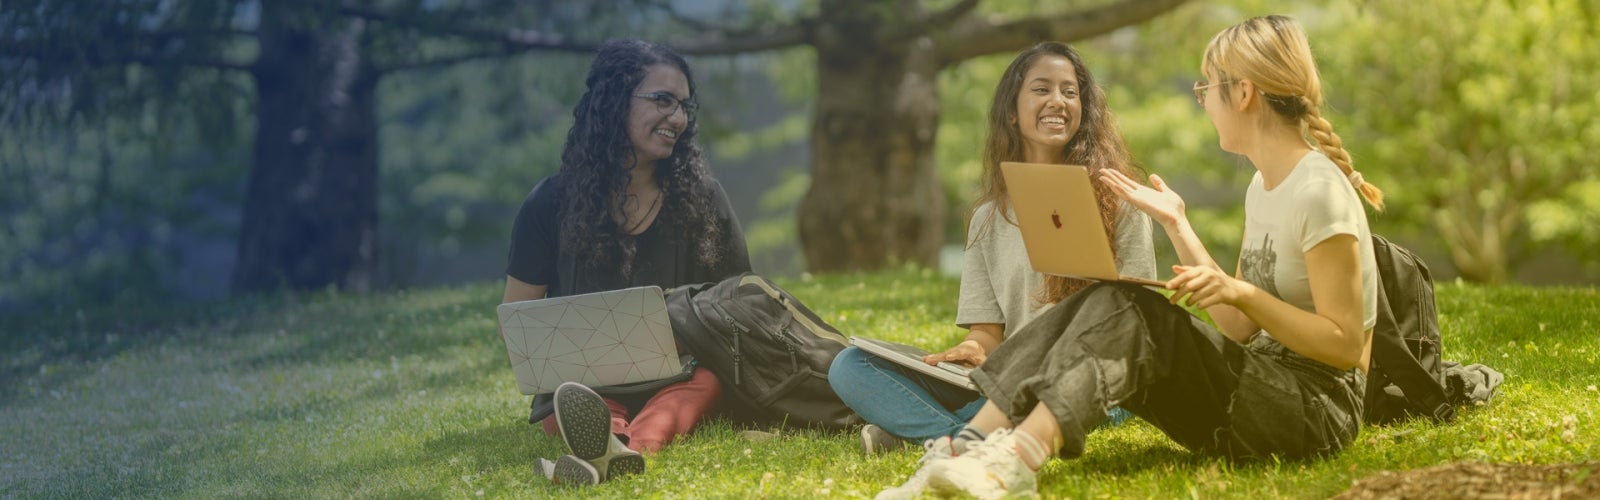 3 female students sitting on grassy hill, smiling and talking